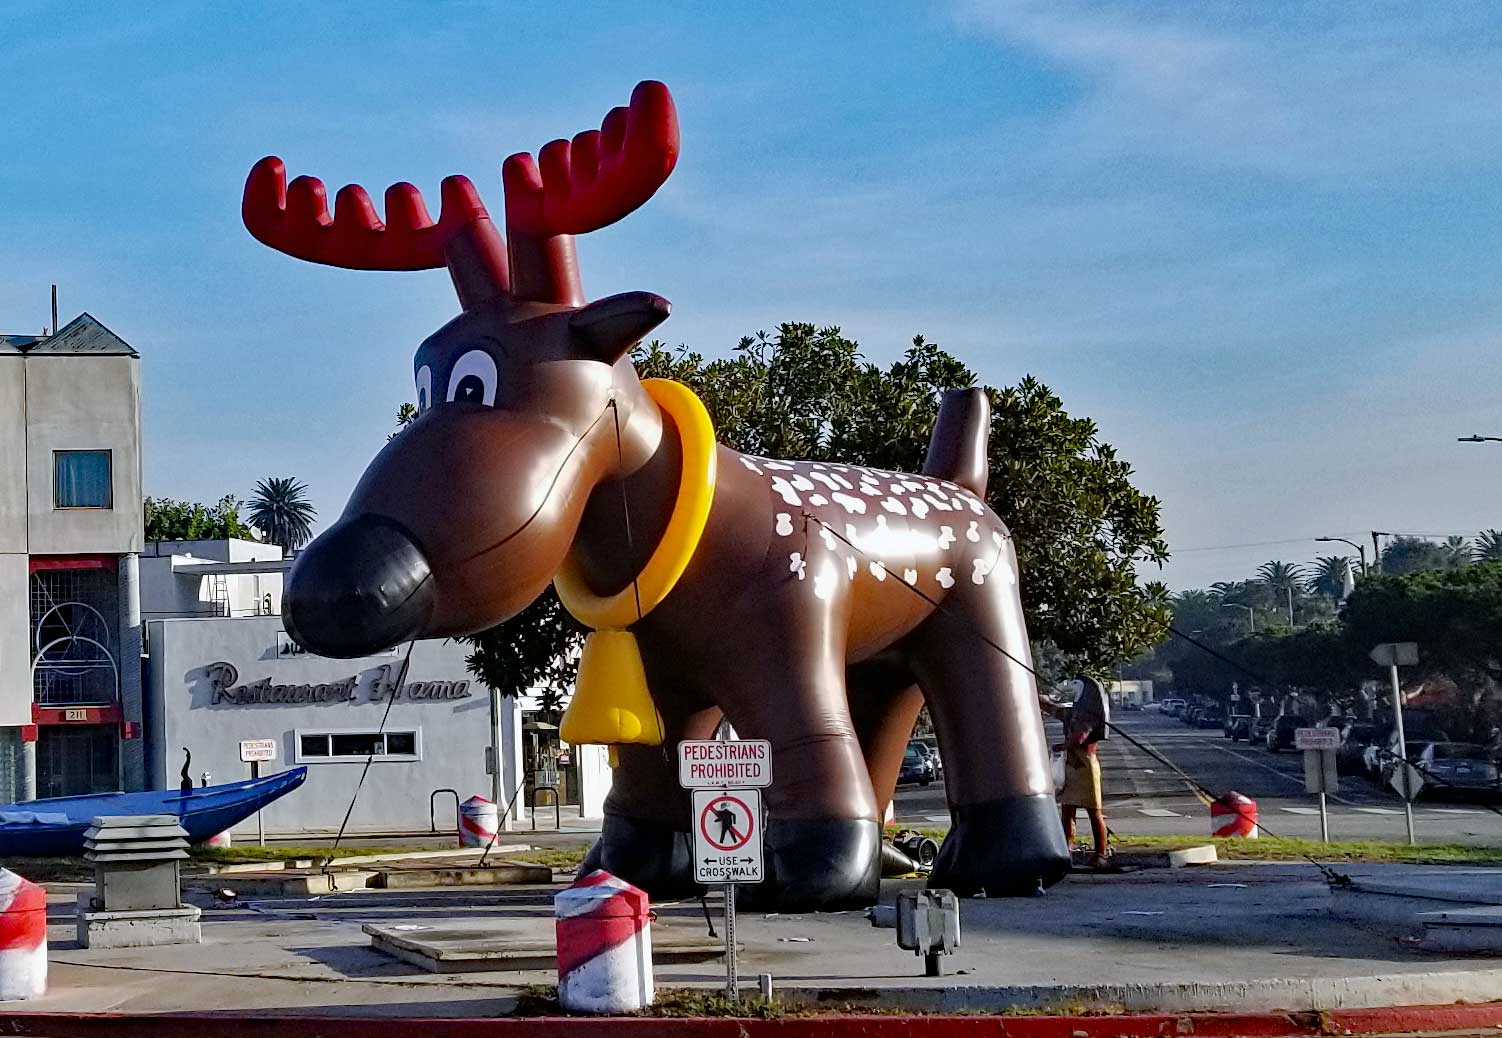 Rudolph the reindeer at the Windward Circle in Venice.